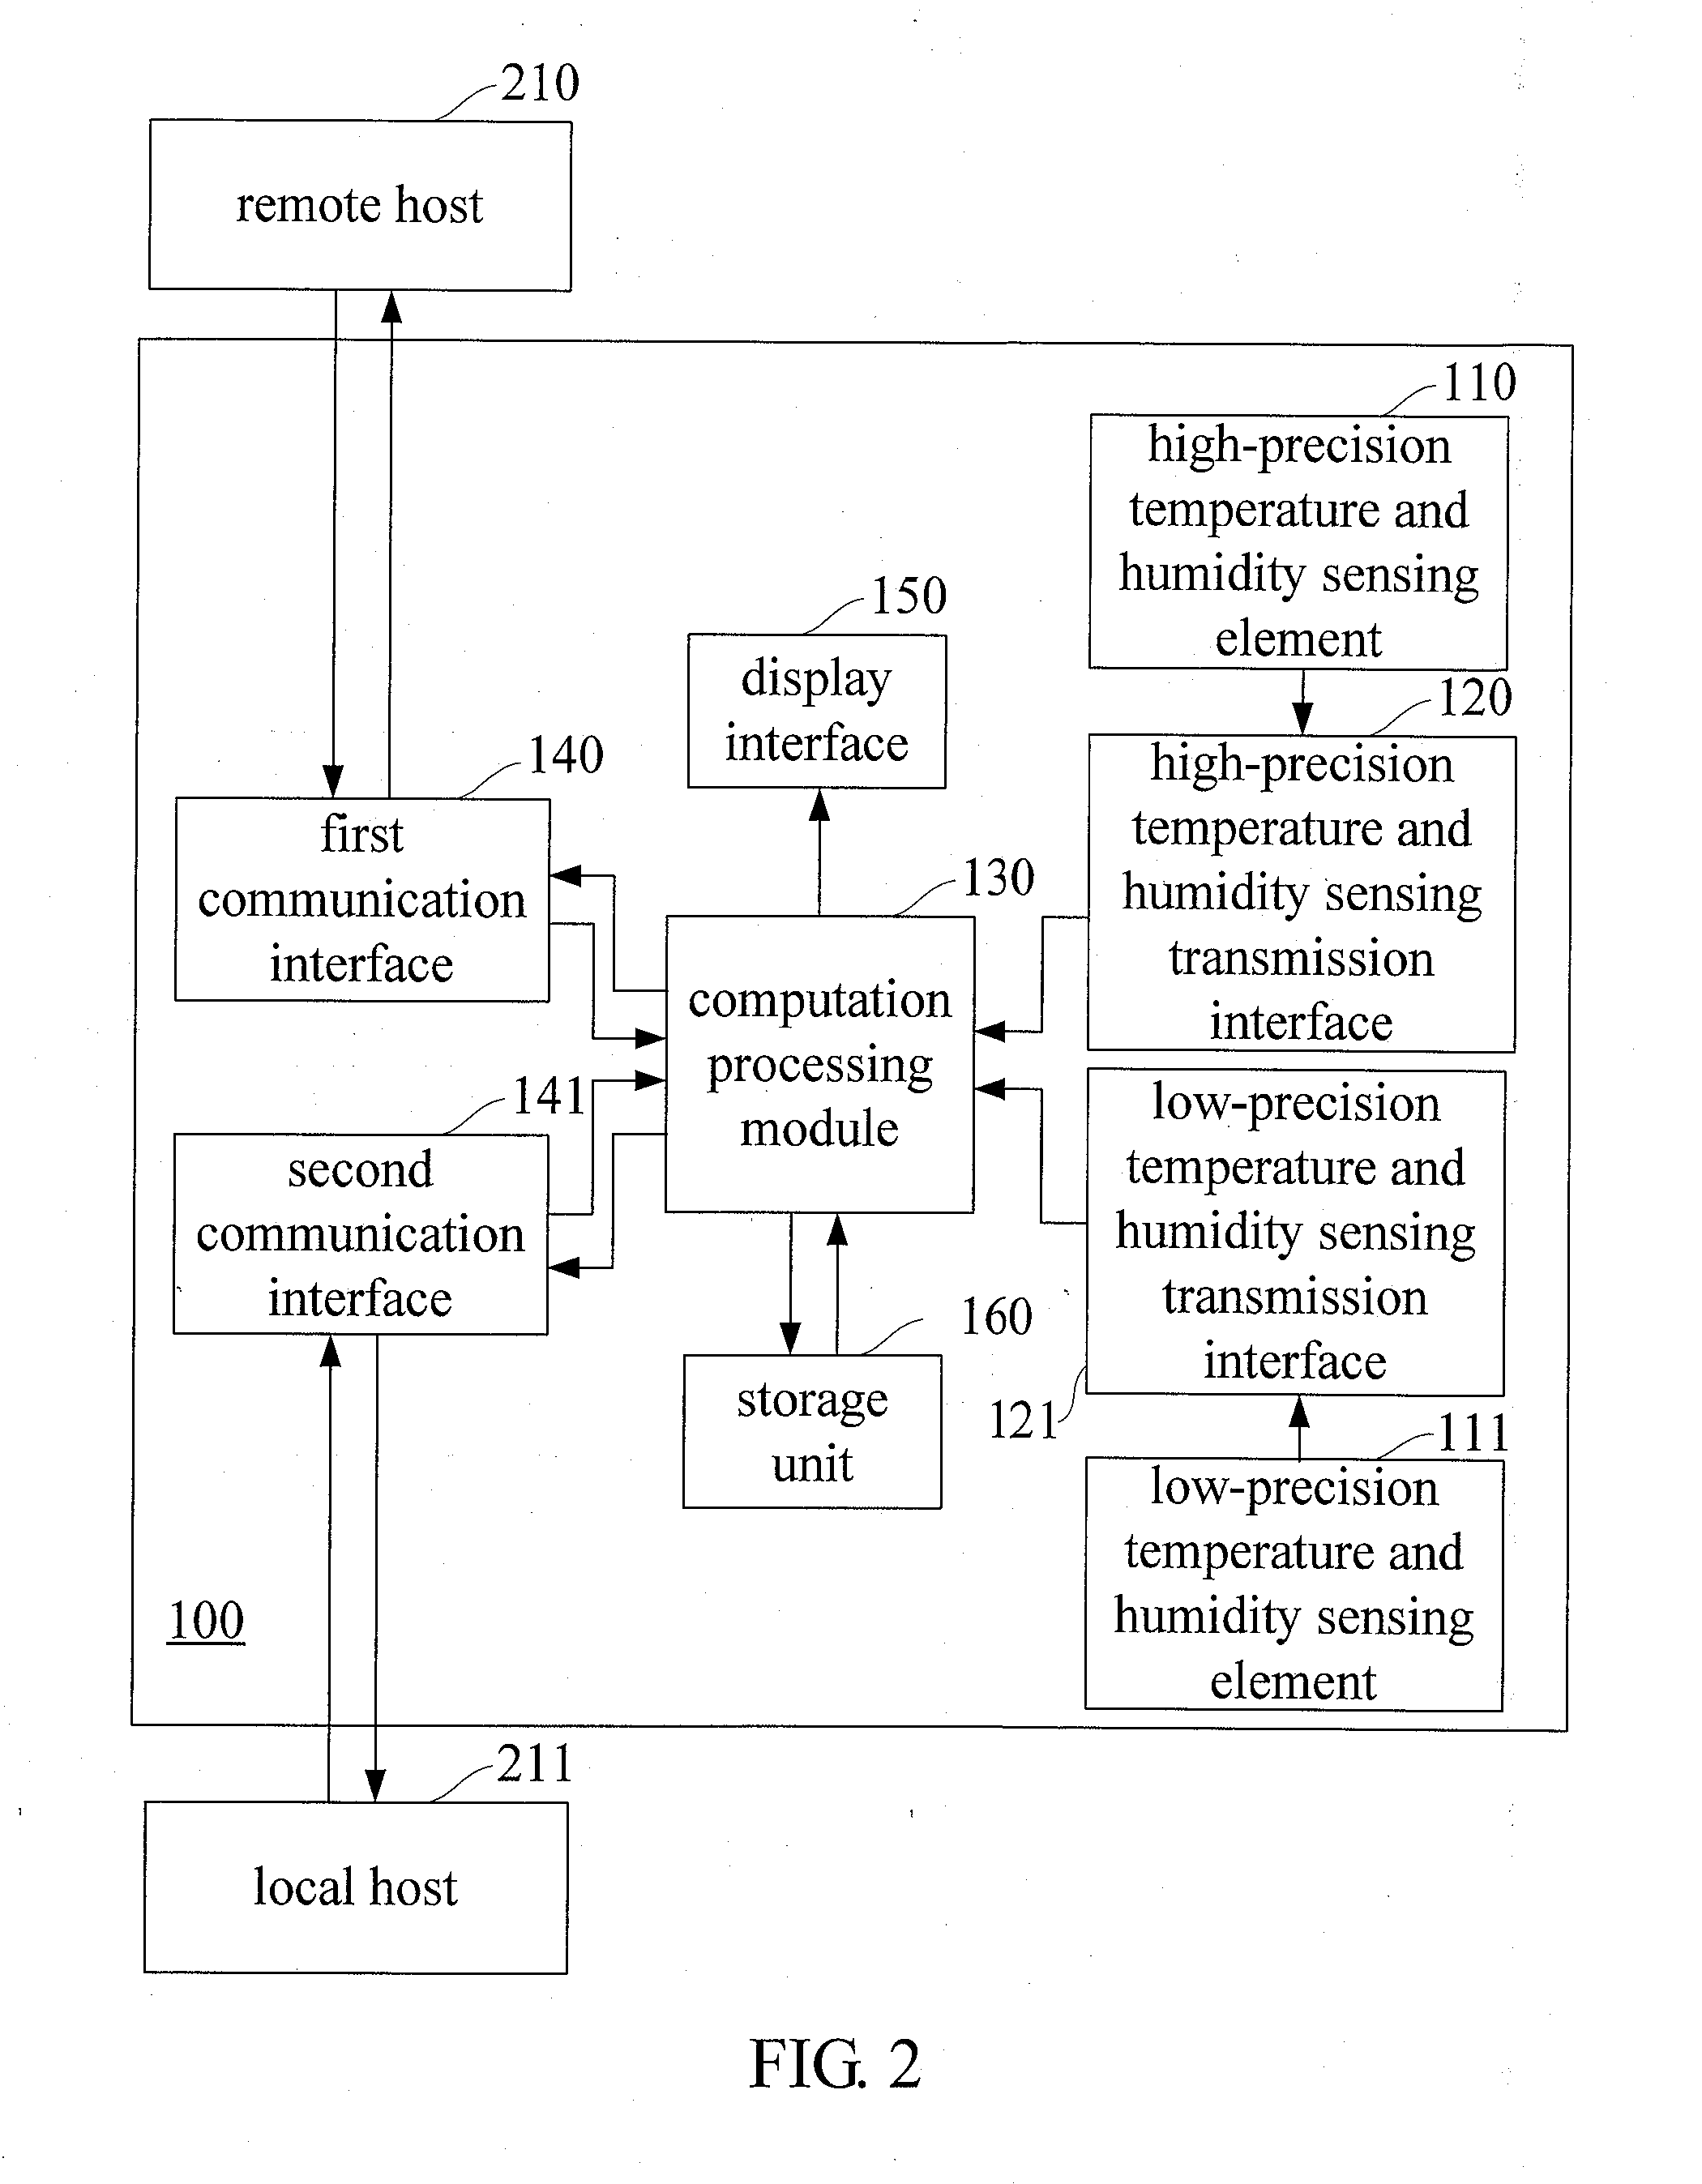 Integrated temperature and humidity control device